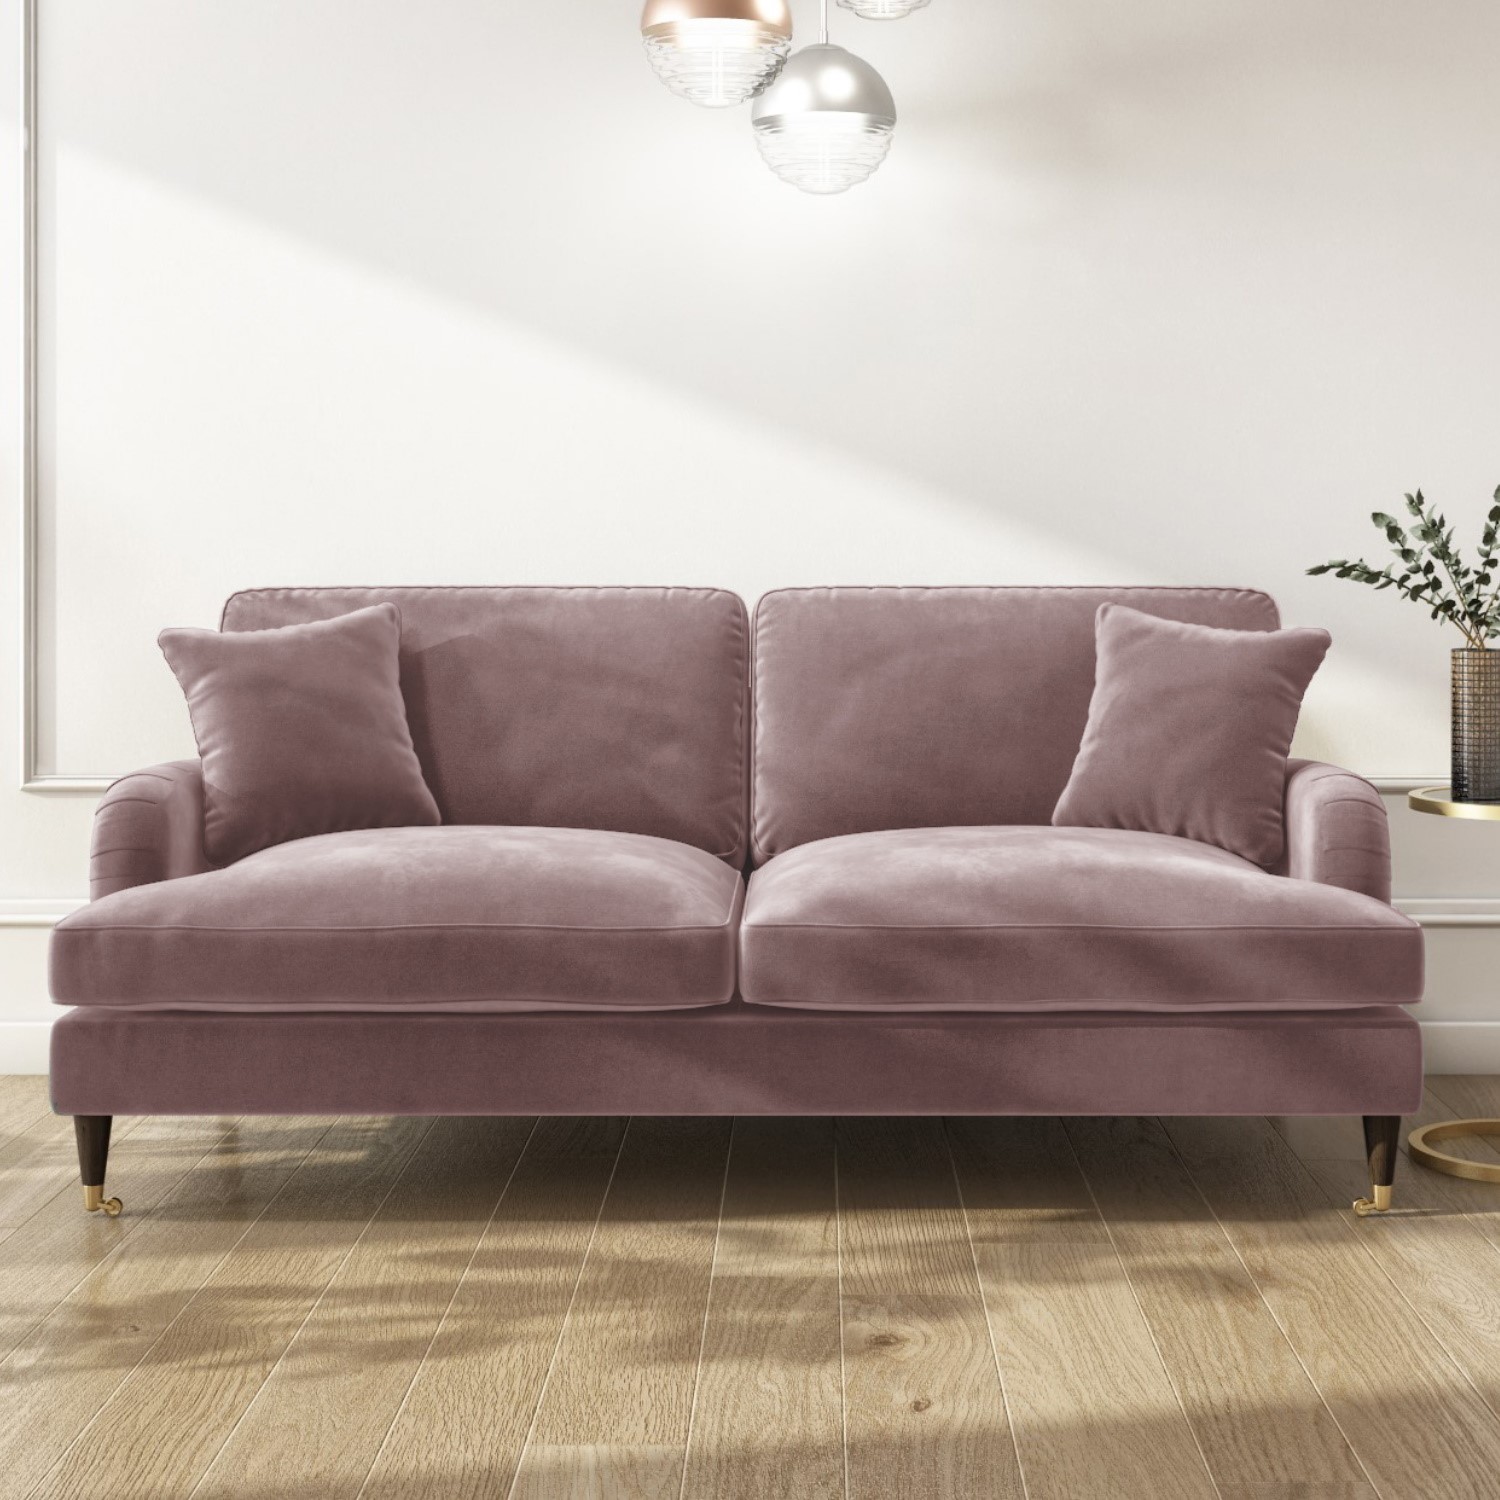 Read more about Pink velvet 3 seater sofa payton